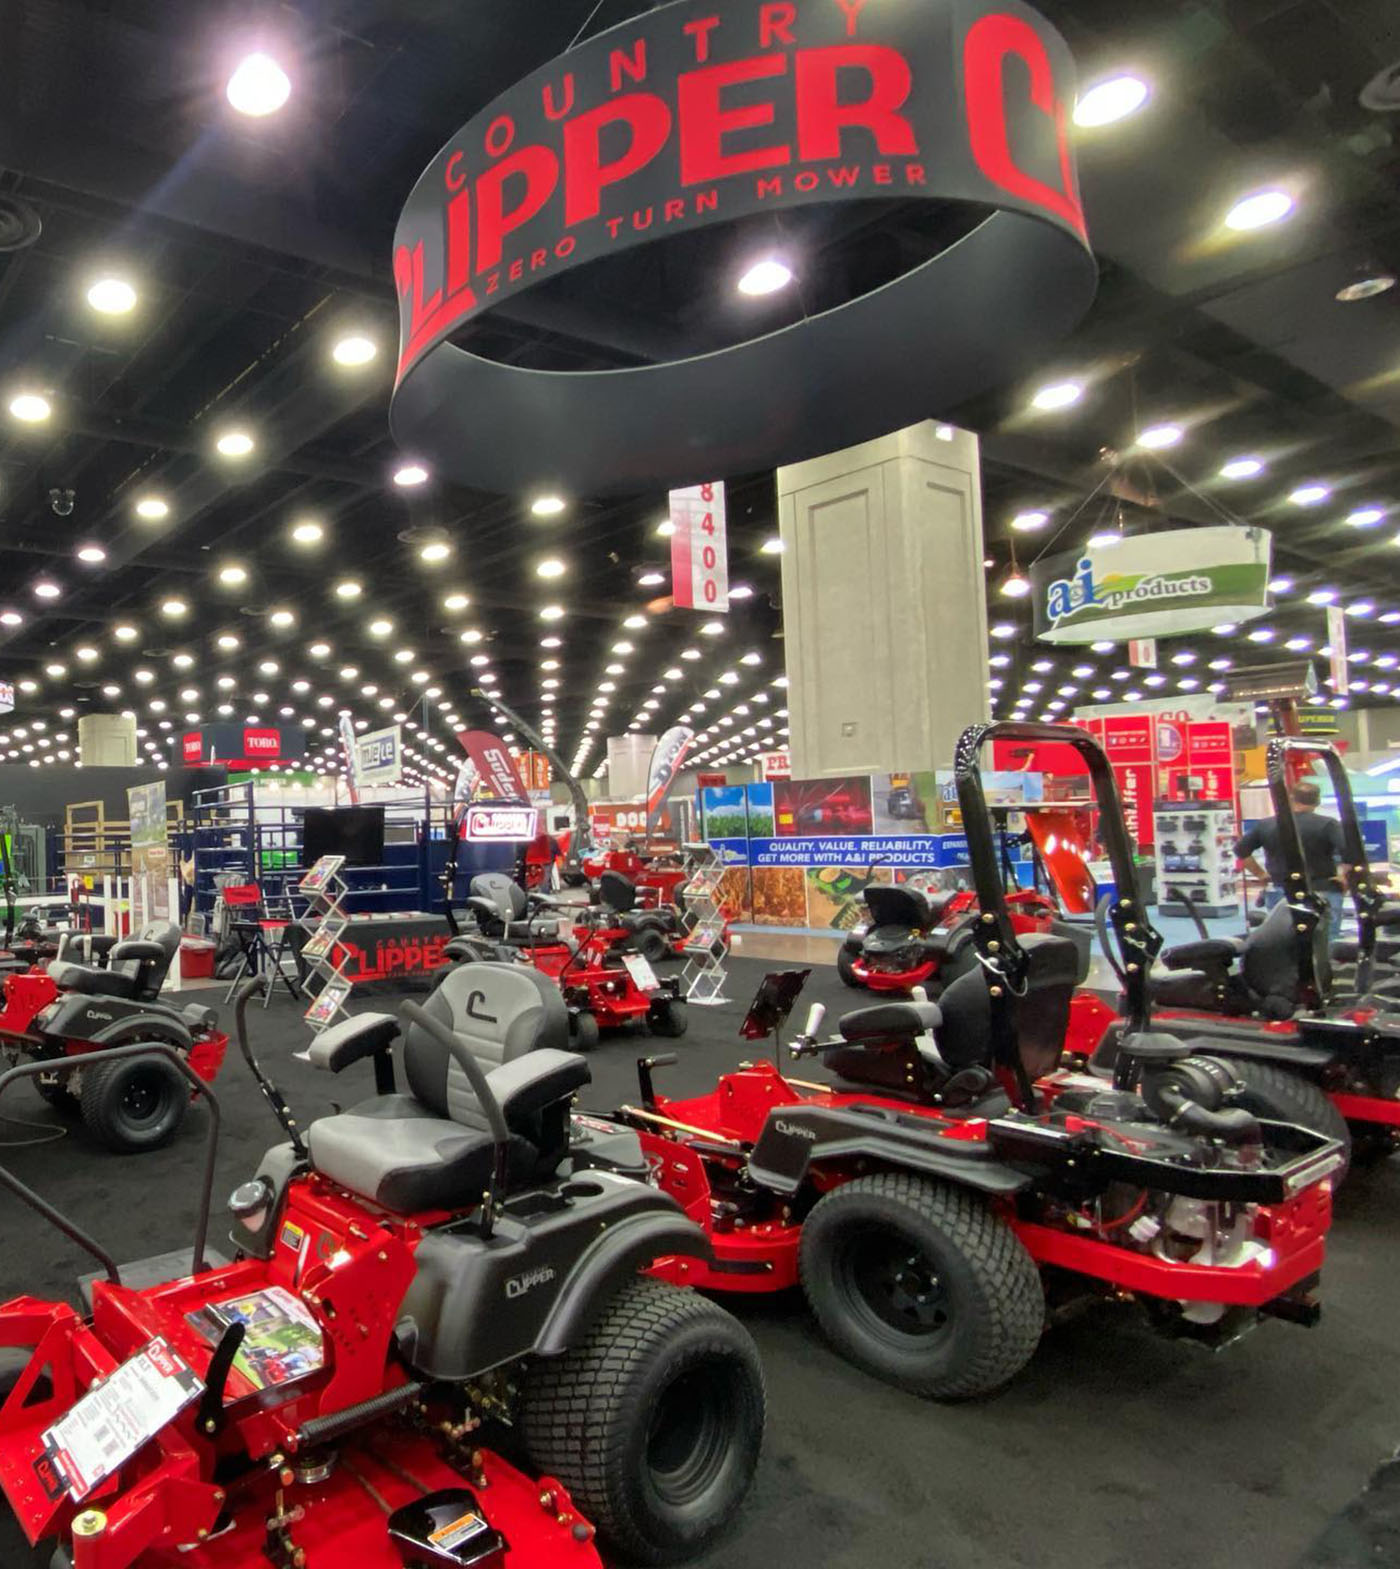 Country Clipper zero-turn mowers at a trade show.